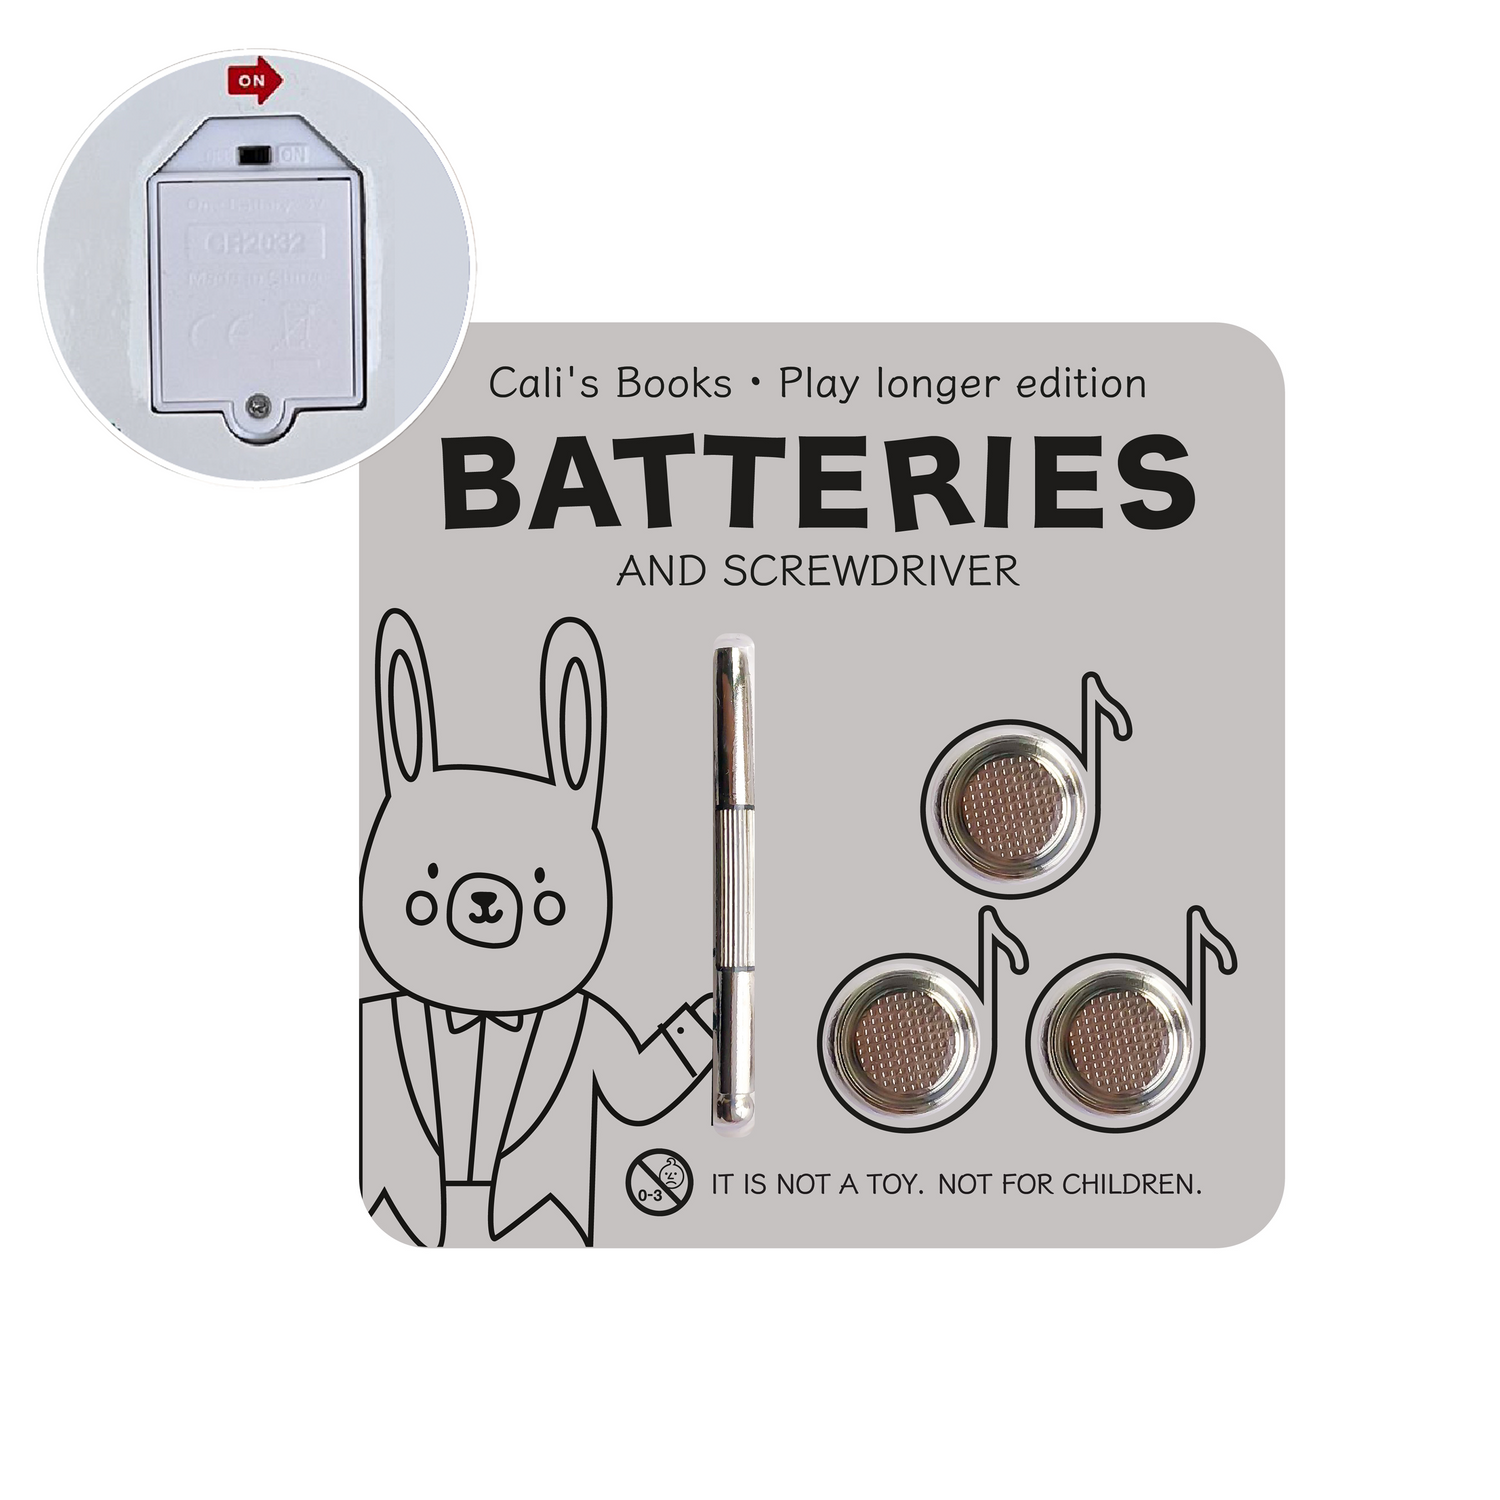 Get FREE replacement battery kits for your sound books!